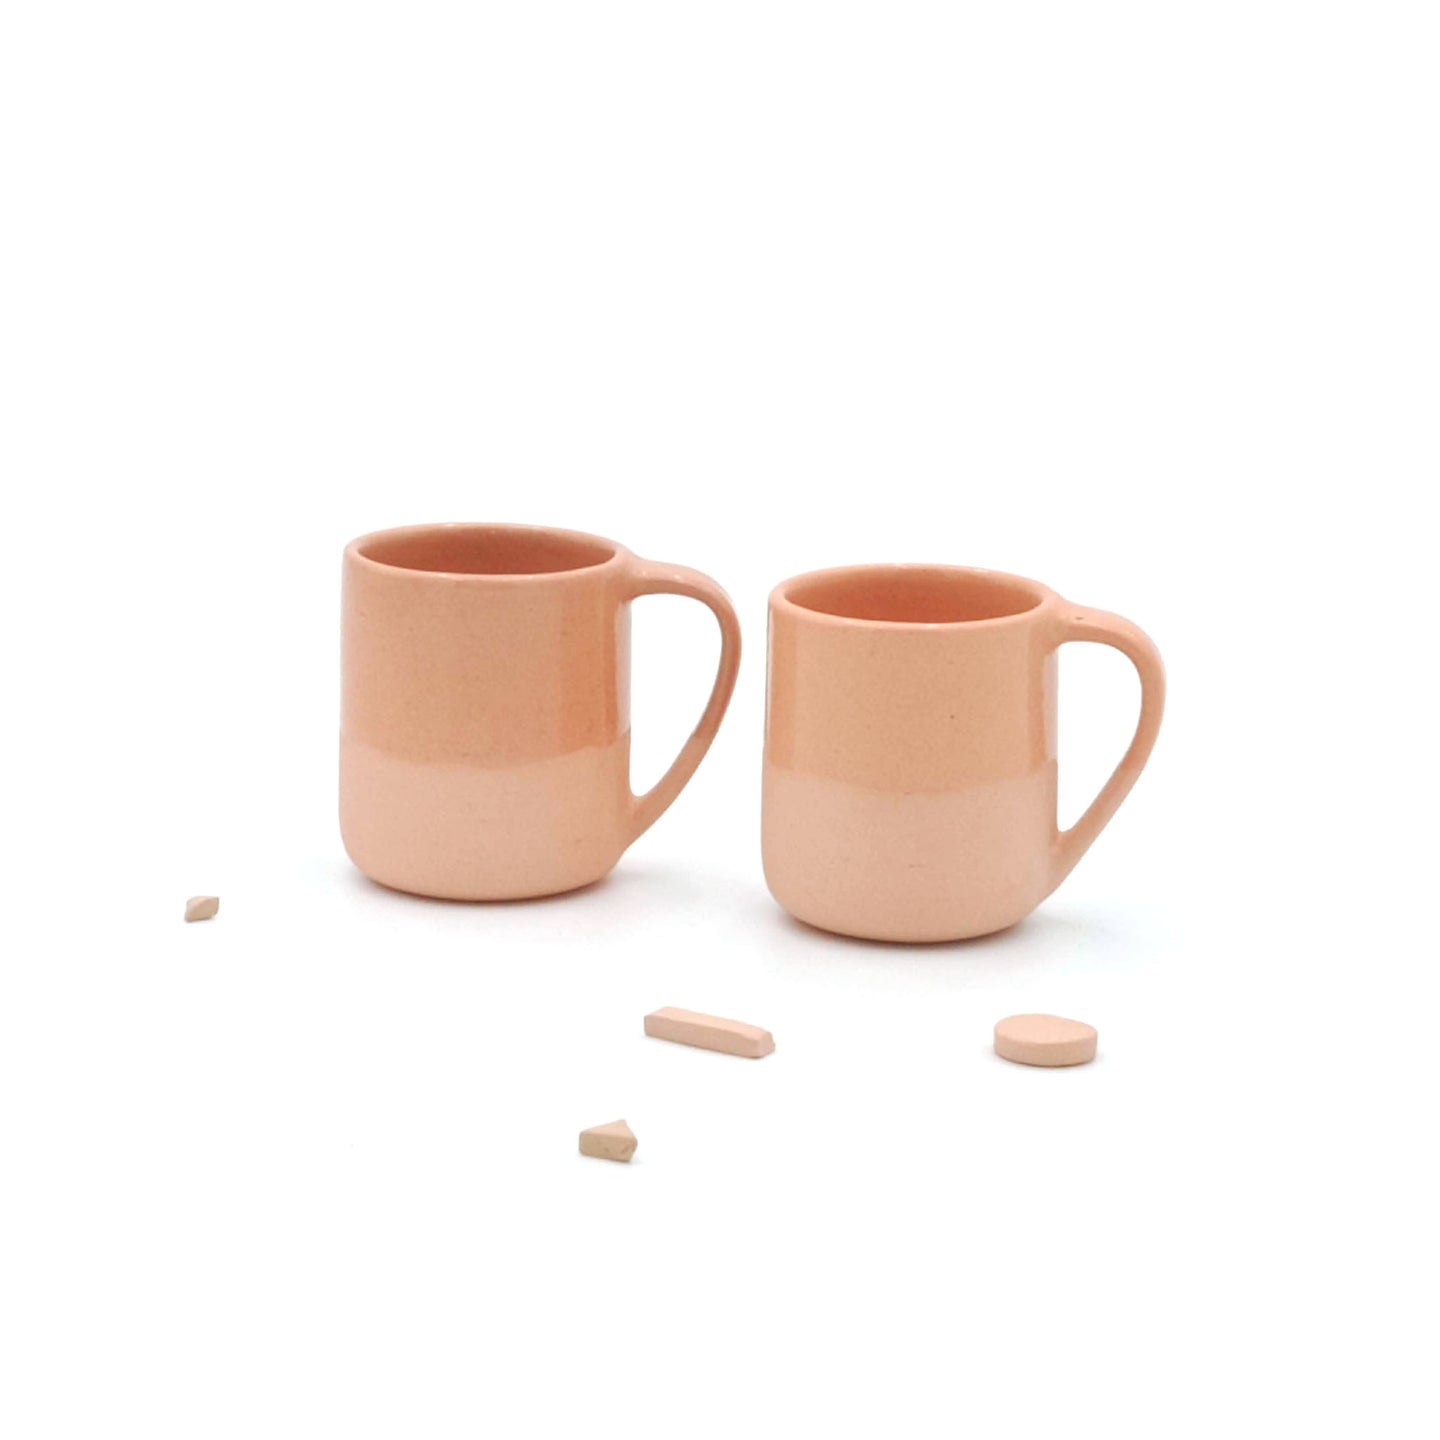 Salmon espresso cups with handle - Set of 2